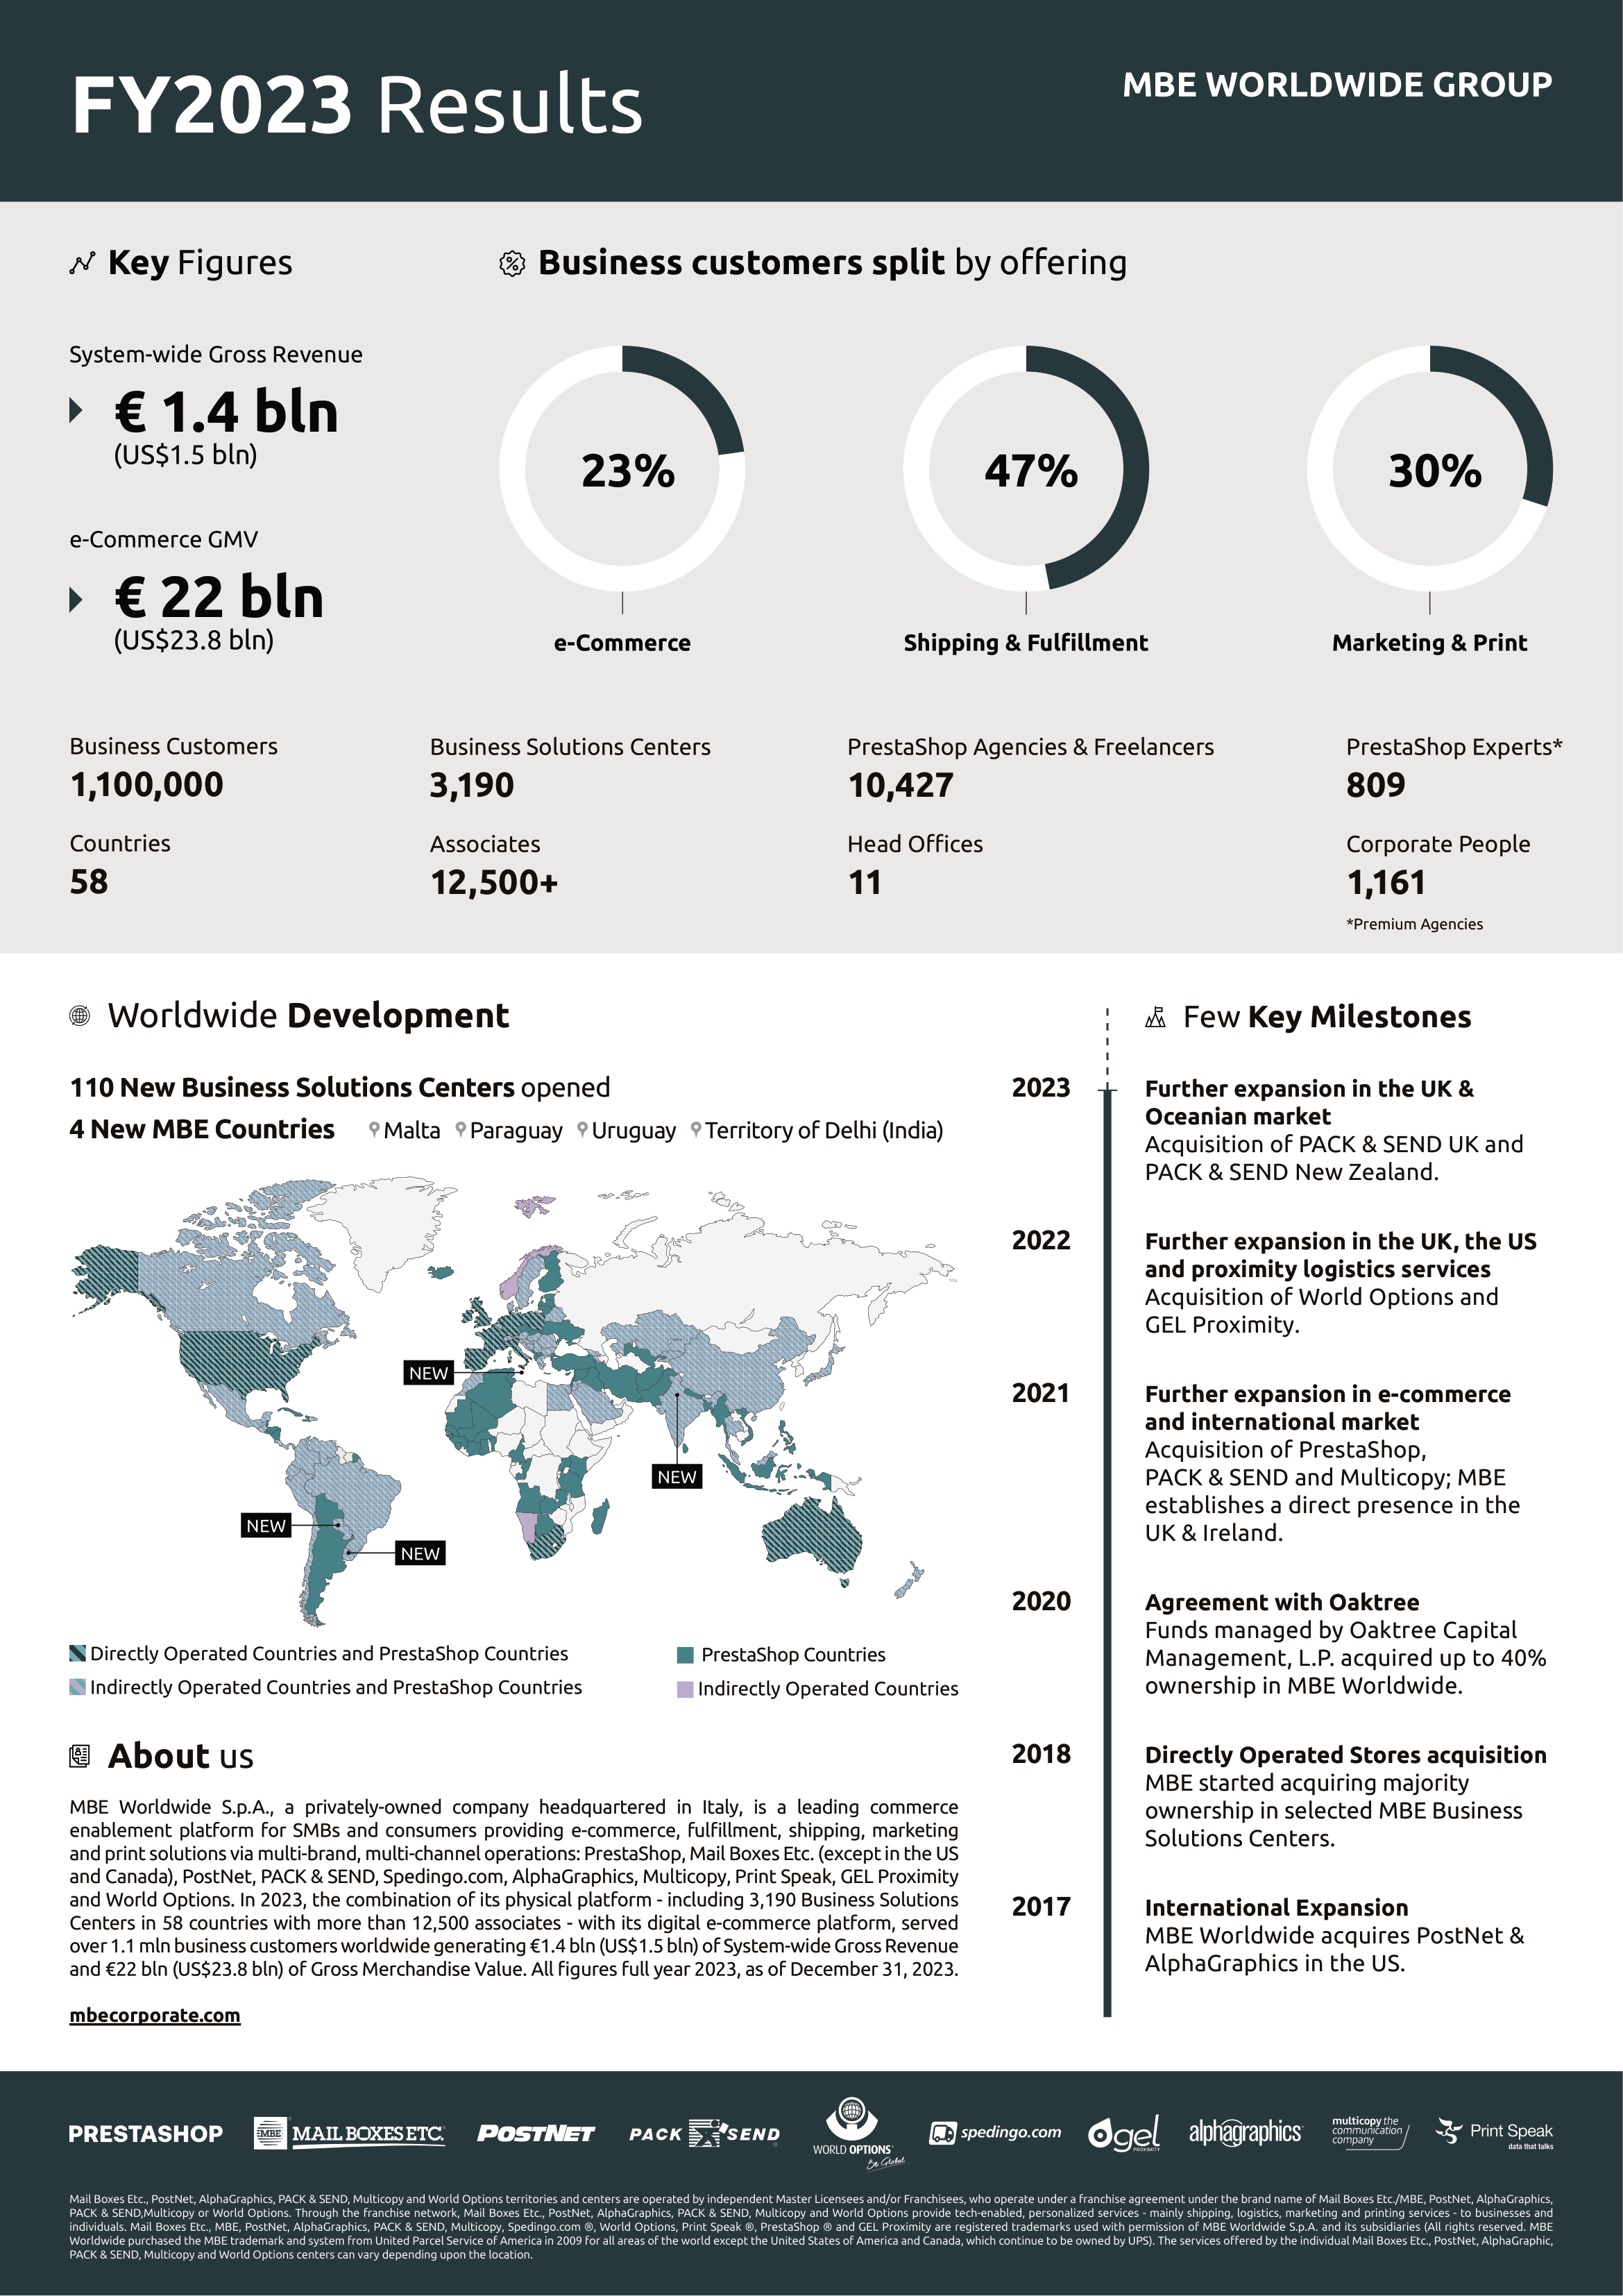 FY2023 Results Infographic